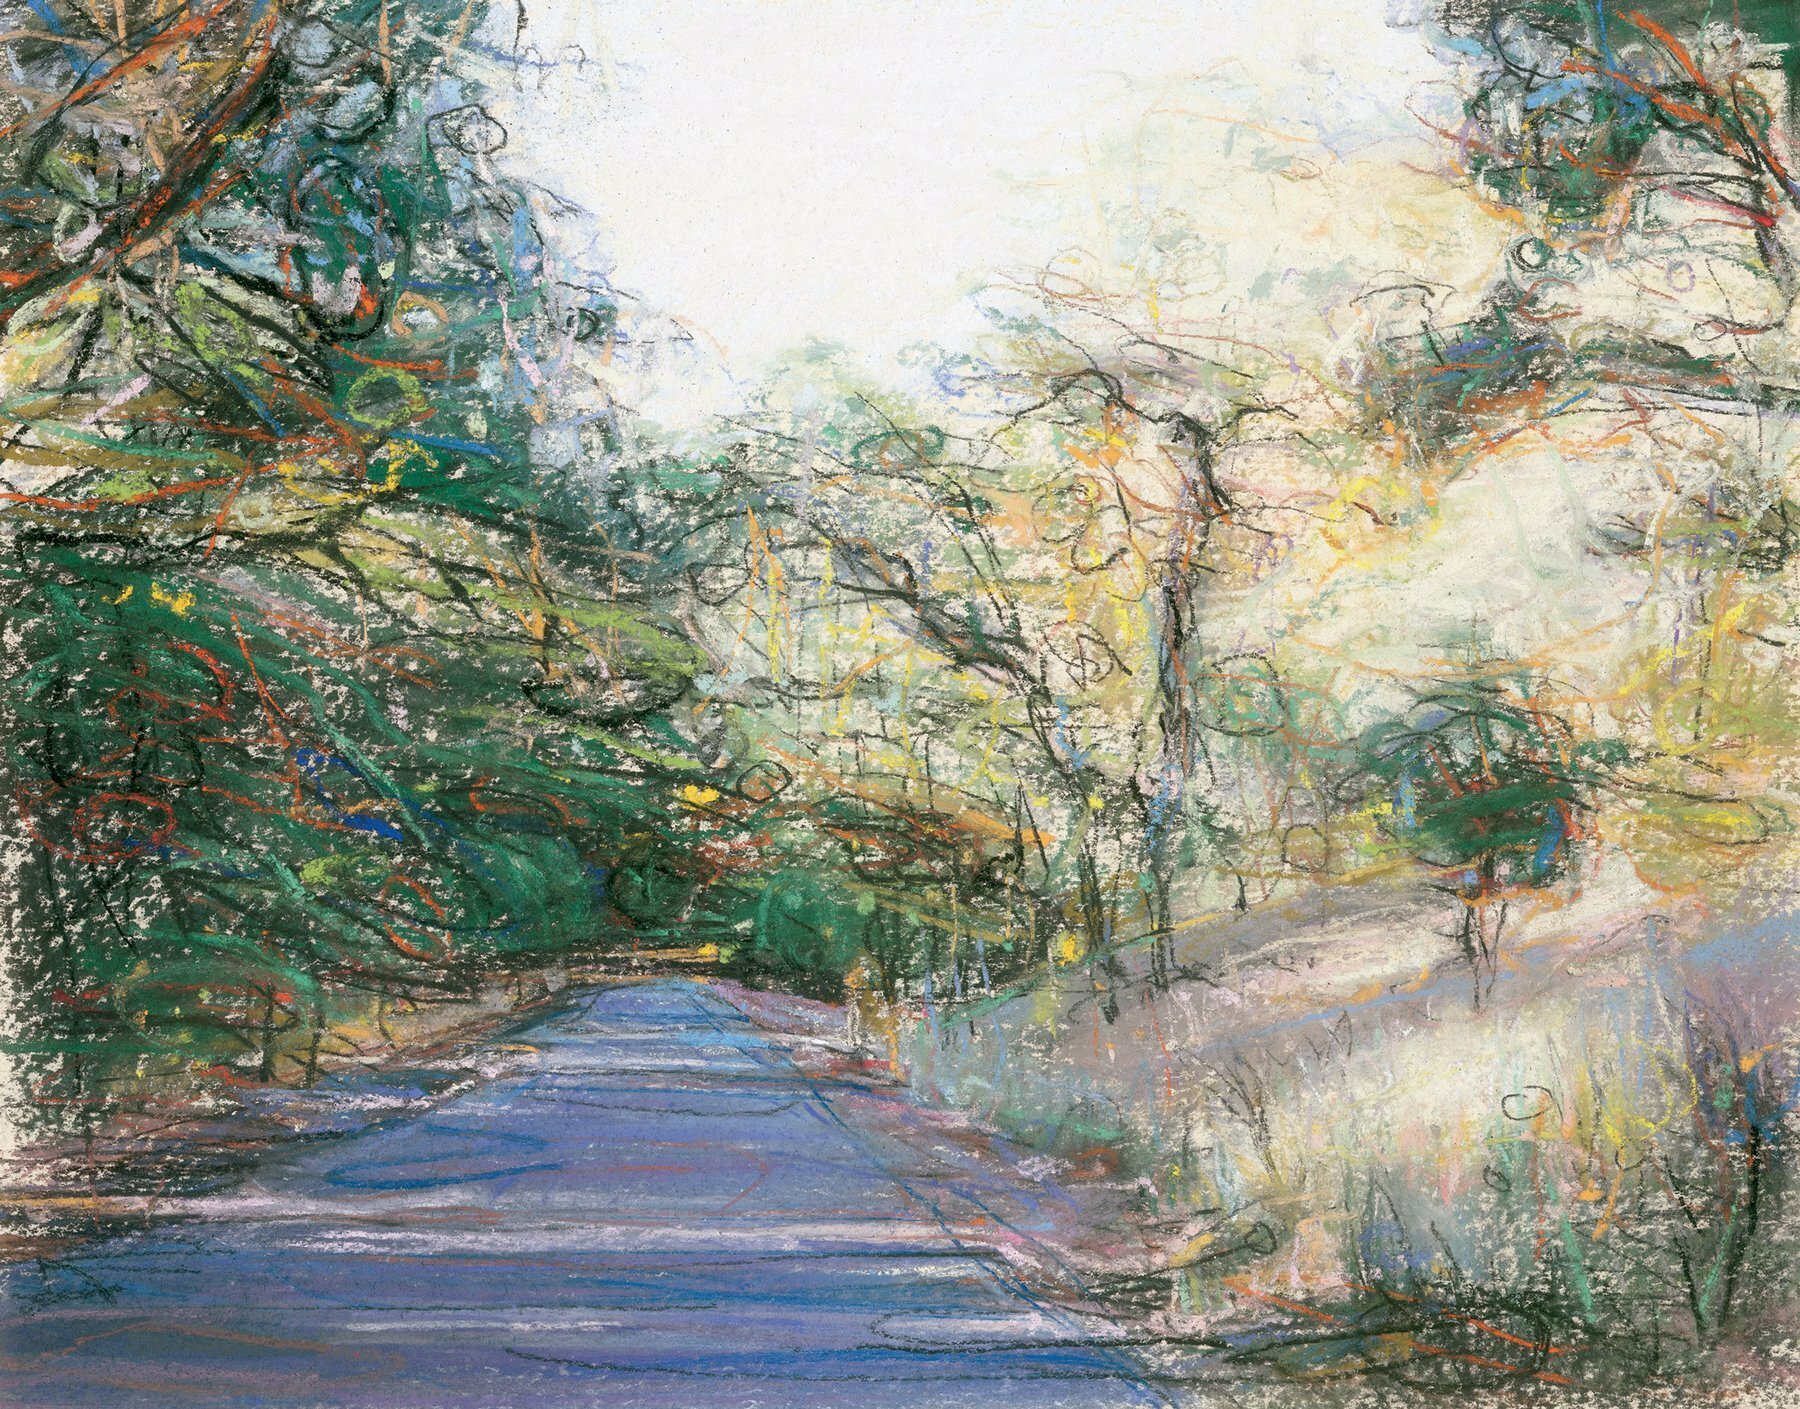 Steven Gordon; Oak Path, 2000, Original Giclee Reproduction, 20 x 16 inches. Artwork description: 241 Limited Edition Print from an original Pastel Painting Done in a more impressionistic style, this hiking and bike path in late afternoon light, sits between Sonoma and Napa counties where it is surrounded by Spanish moss, manzanita, and oak trees. ...